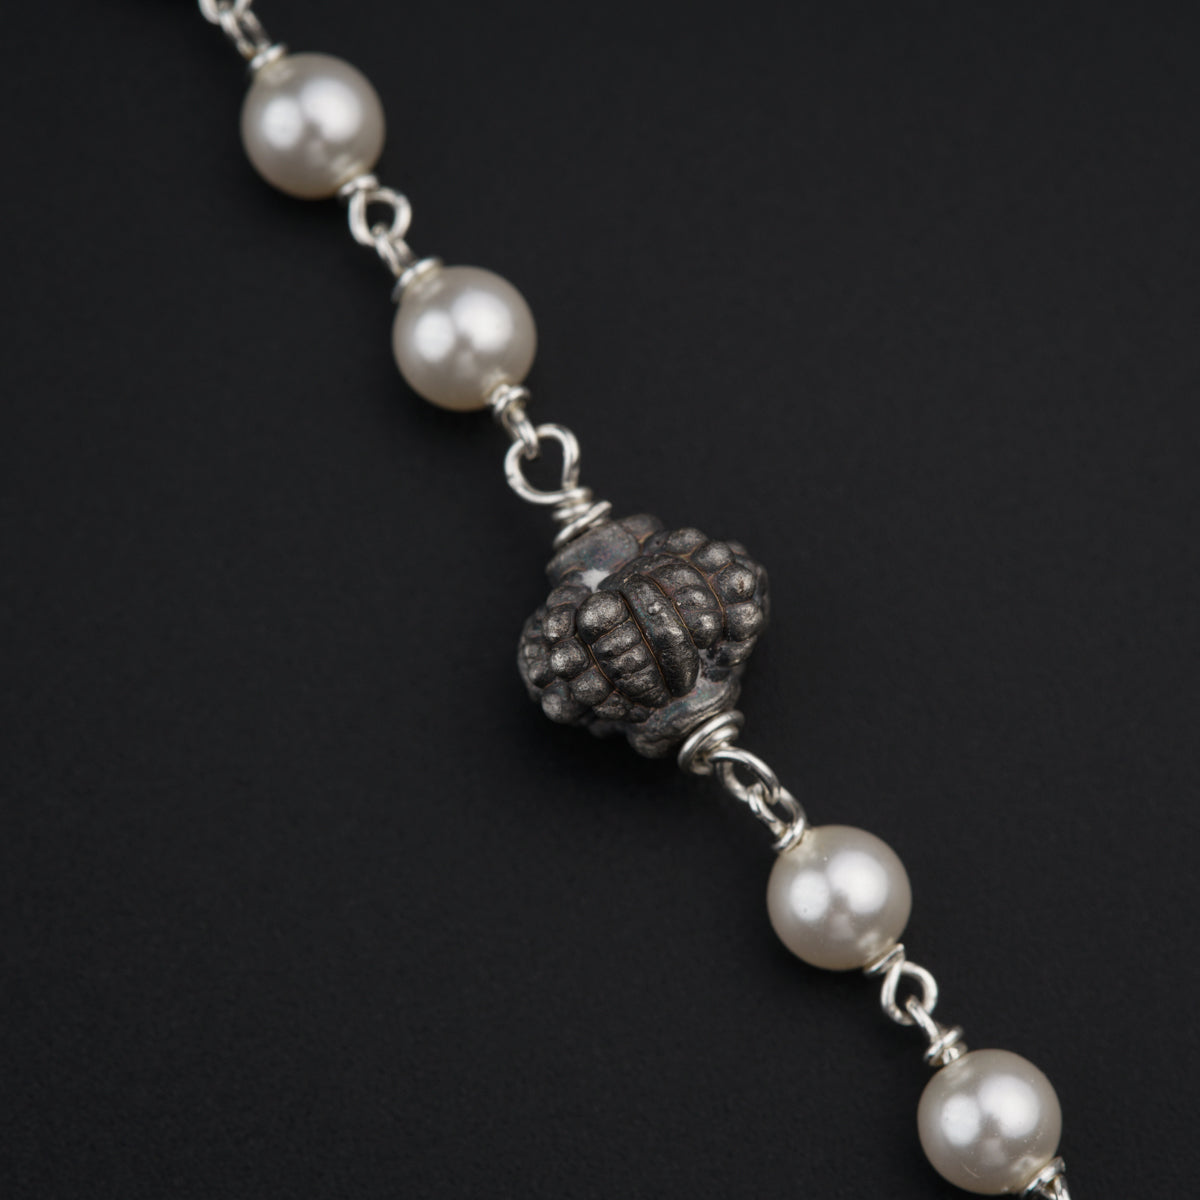 a bracelet with pearls on a black background